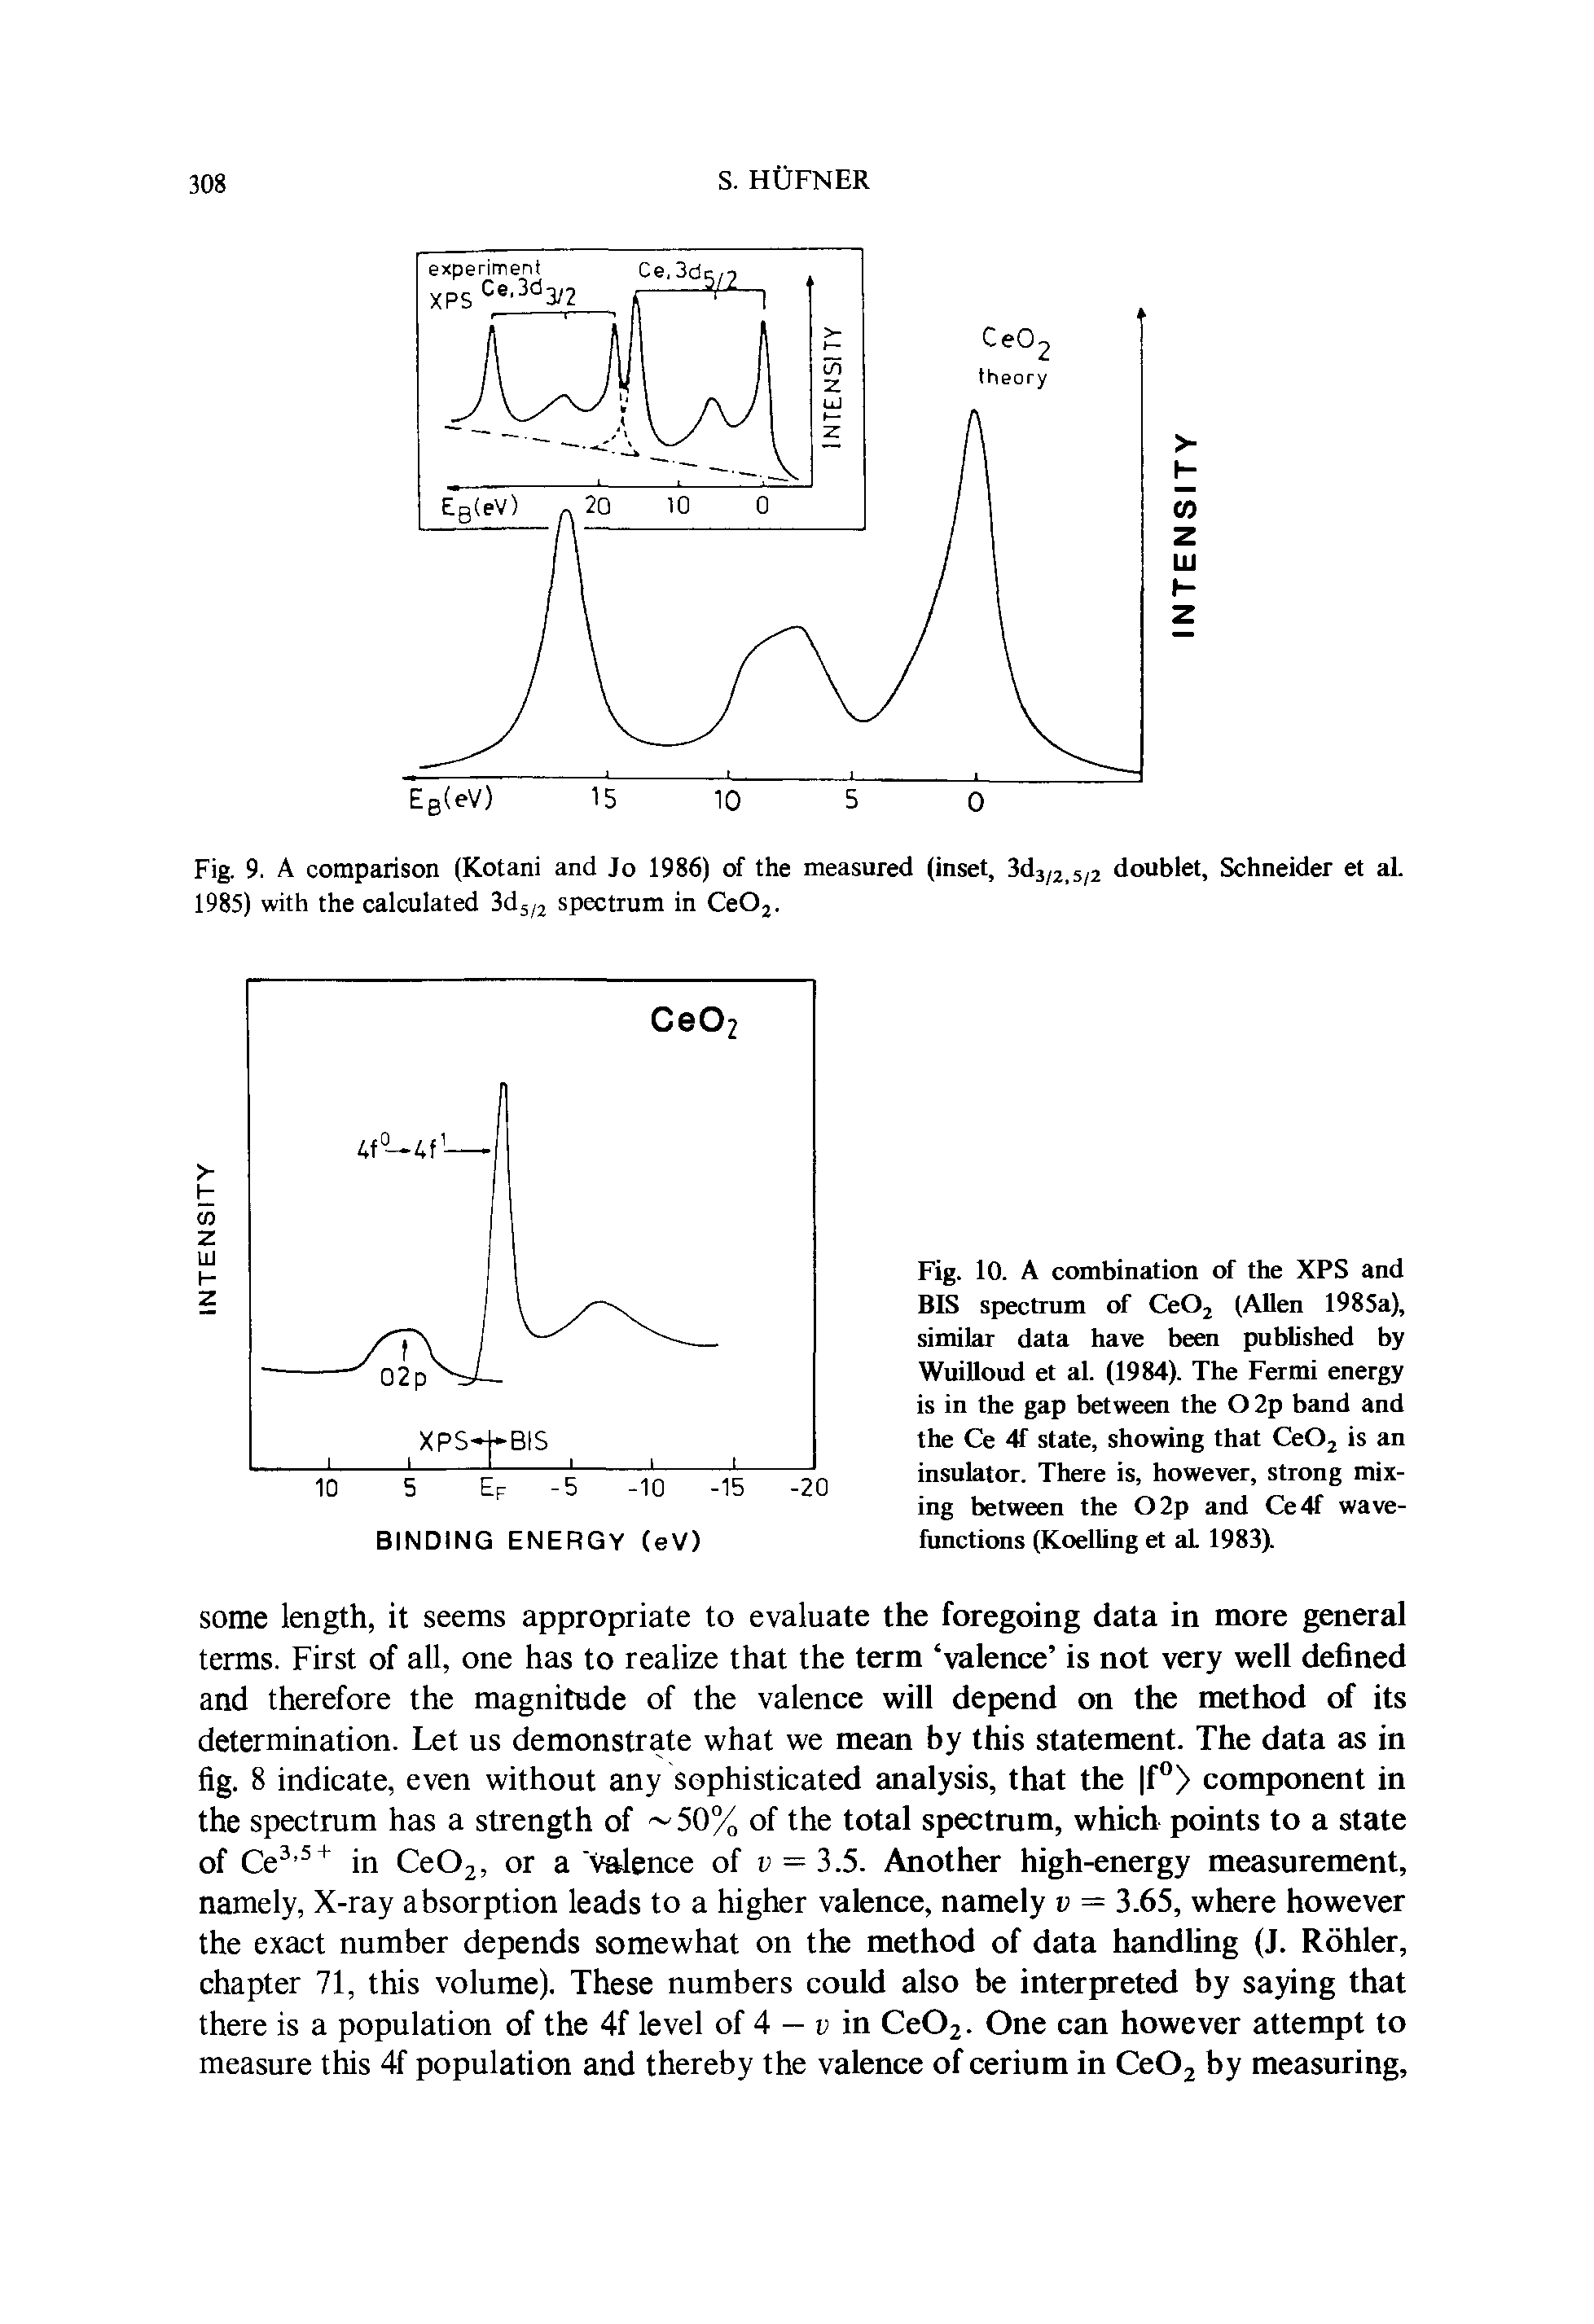 Fig. 10. A combination of the XPS and BIS spectrum of CeOj (Allen 1985a), similar data have been pubhshed by Wuilloud et al. (1984). The Fermi energy is in the gap between the O 2p band and the Ce 4f state, showing that CeOj is an insulator. There is, however, strong mixing between the 02p and Ce4f wave-functions (Koelling et aL 1983X...